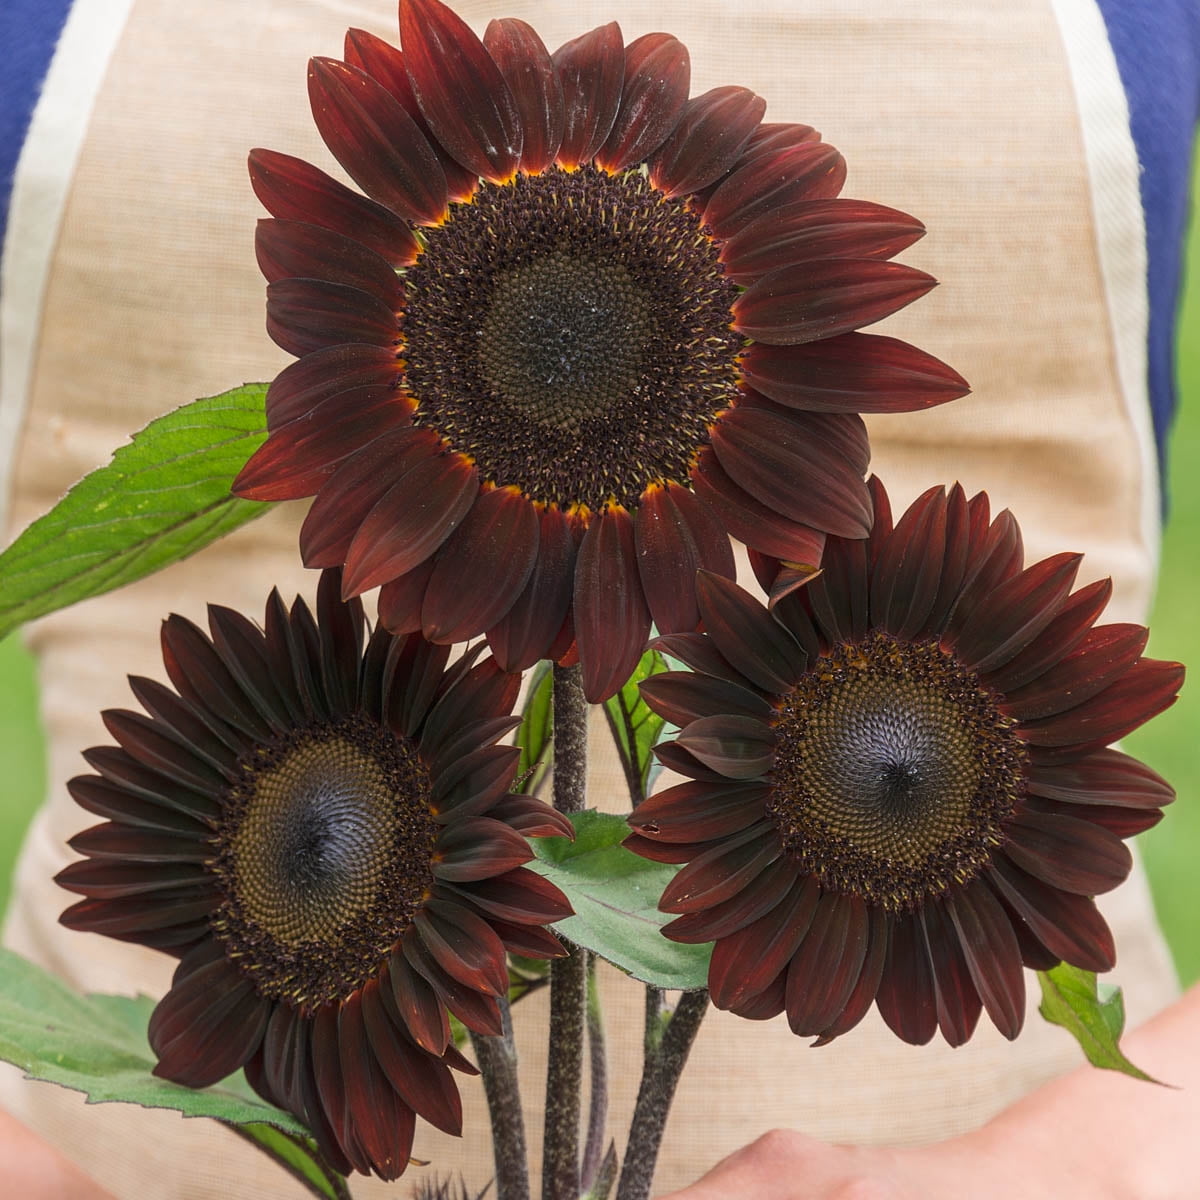 S/H  See our store Comb Bicolor Sunflower 15 Seeds 